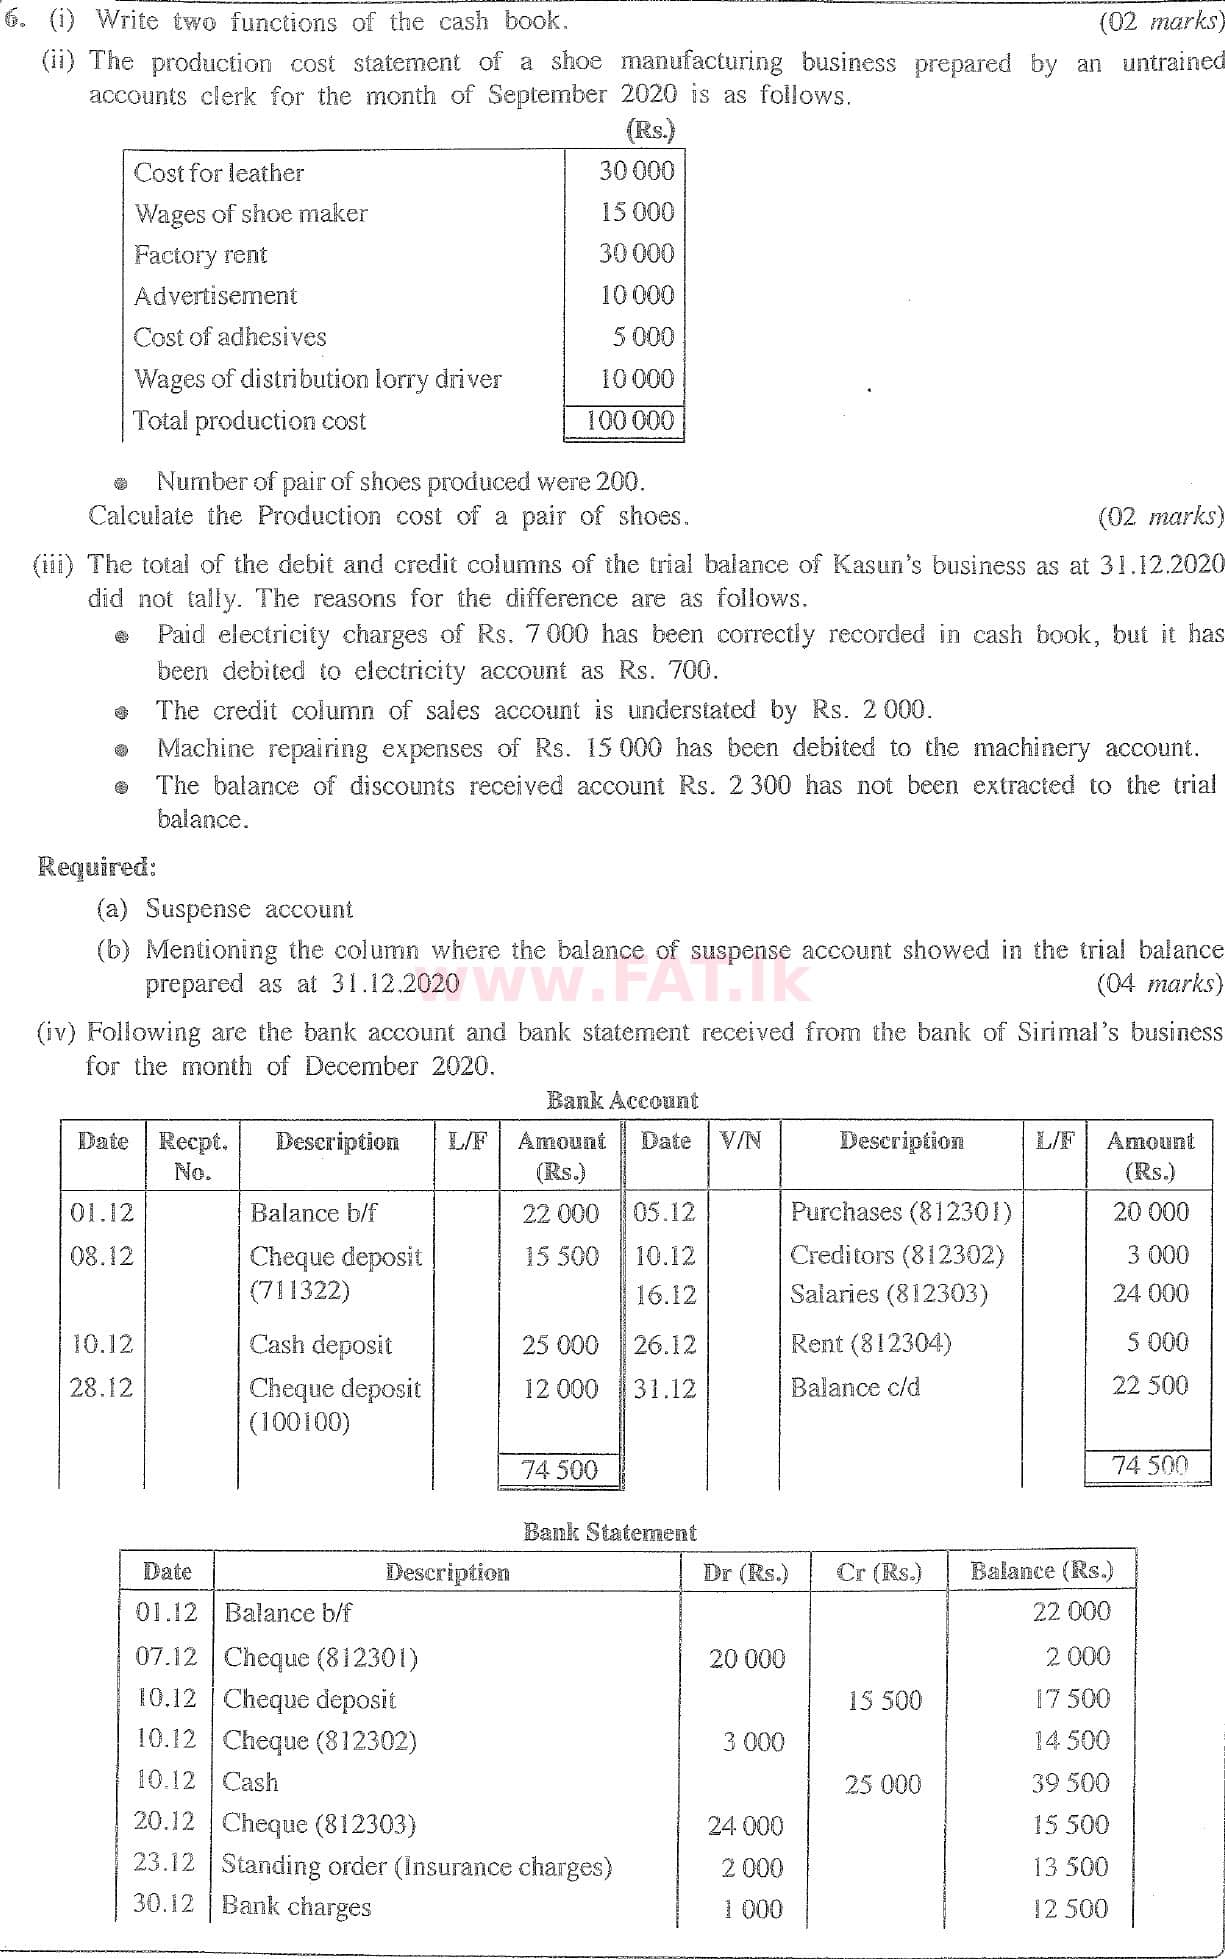 National Syllabus : Ordinary Level (O/L) Business and Accounting Studies - 2020 March - Paper II (English Medium) 6 1